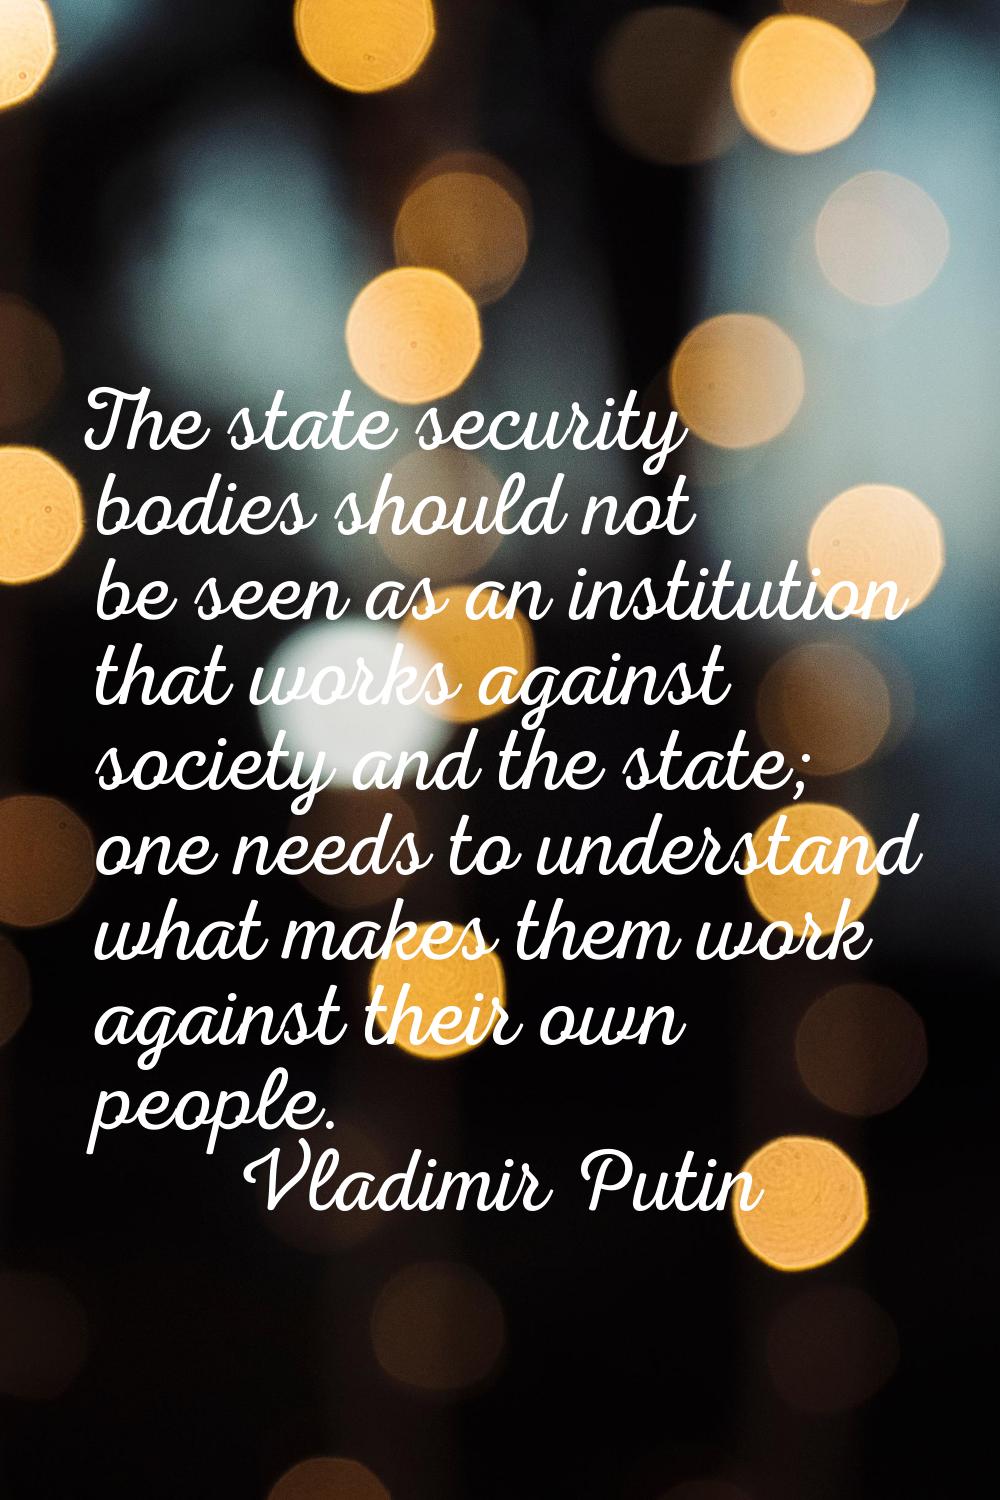 The state security bodies should not be seen as an institution that works against society and the s